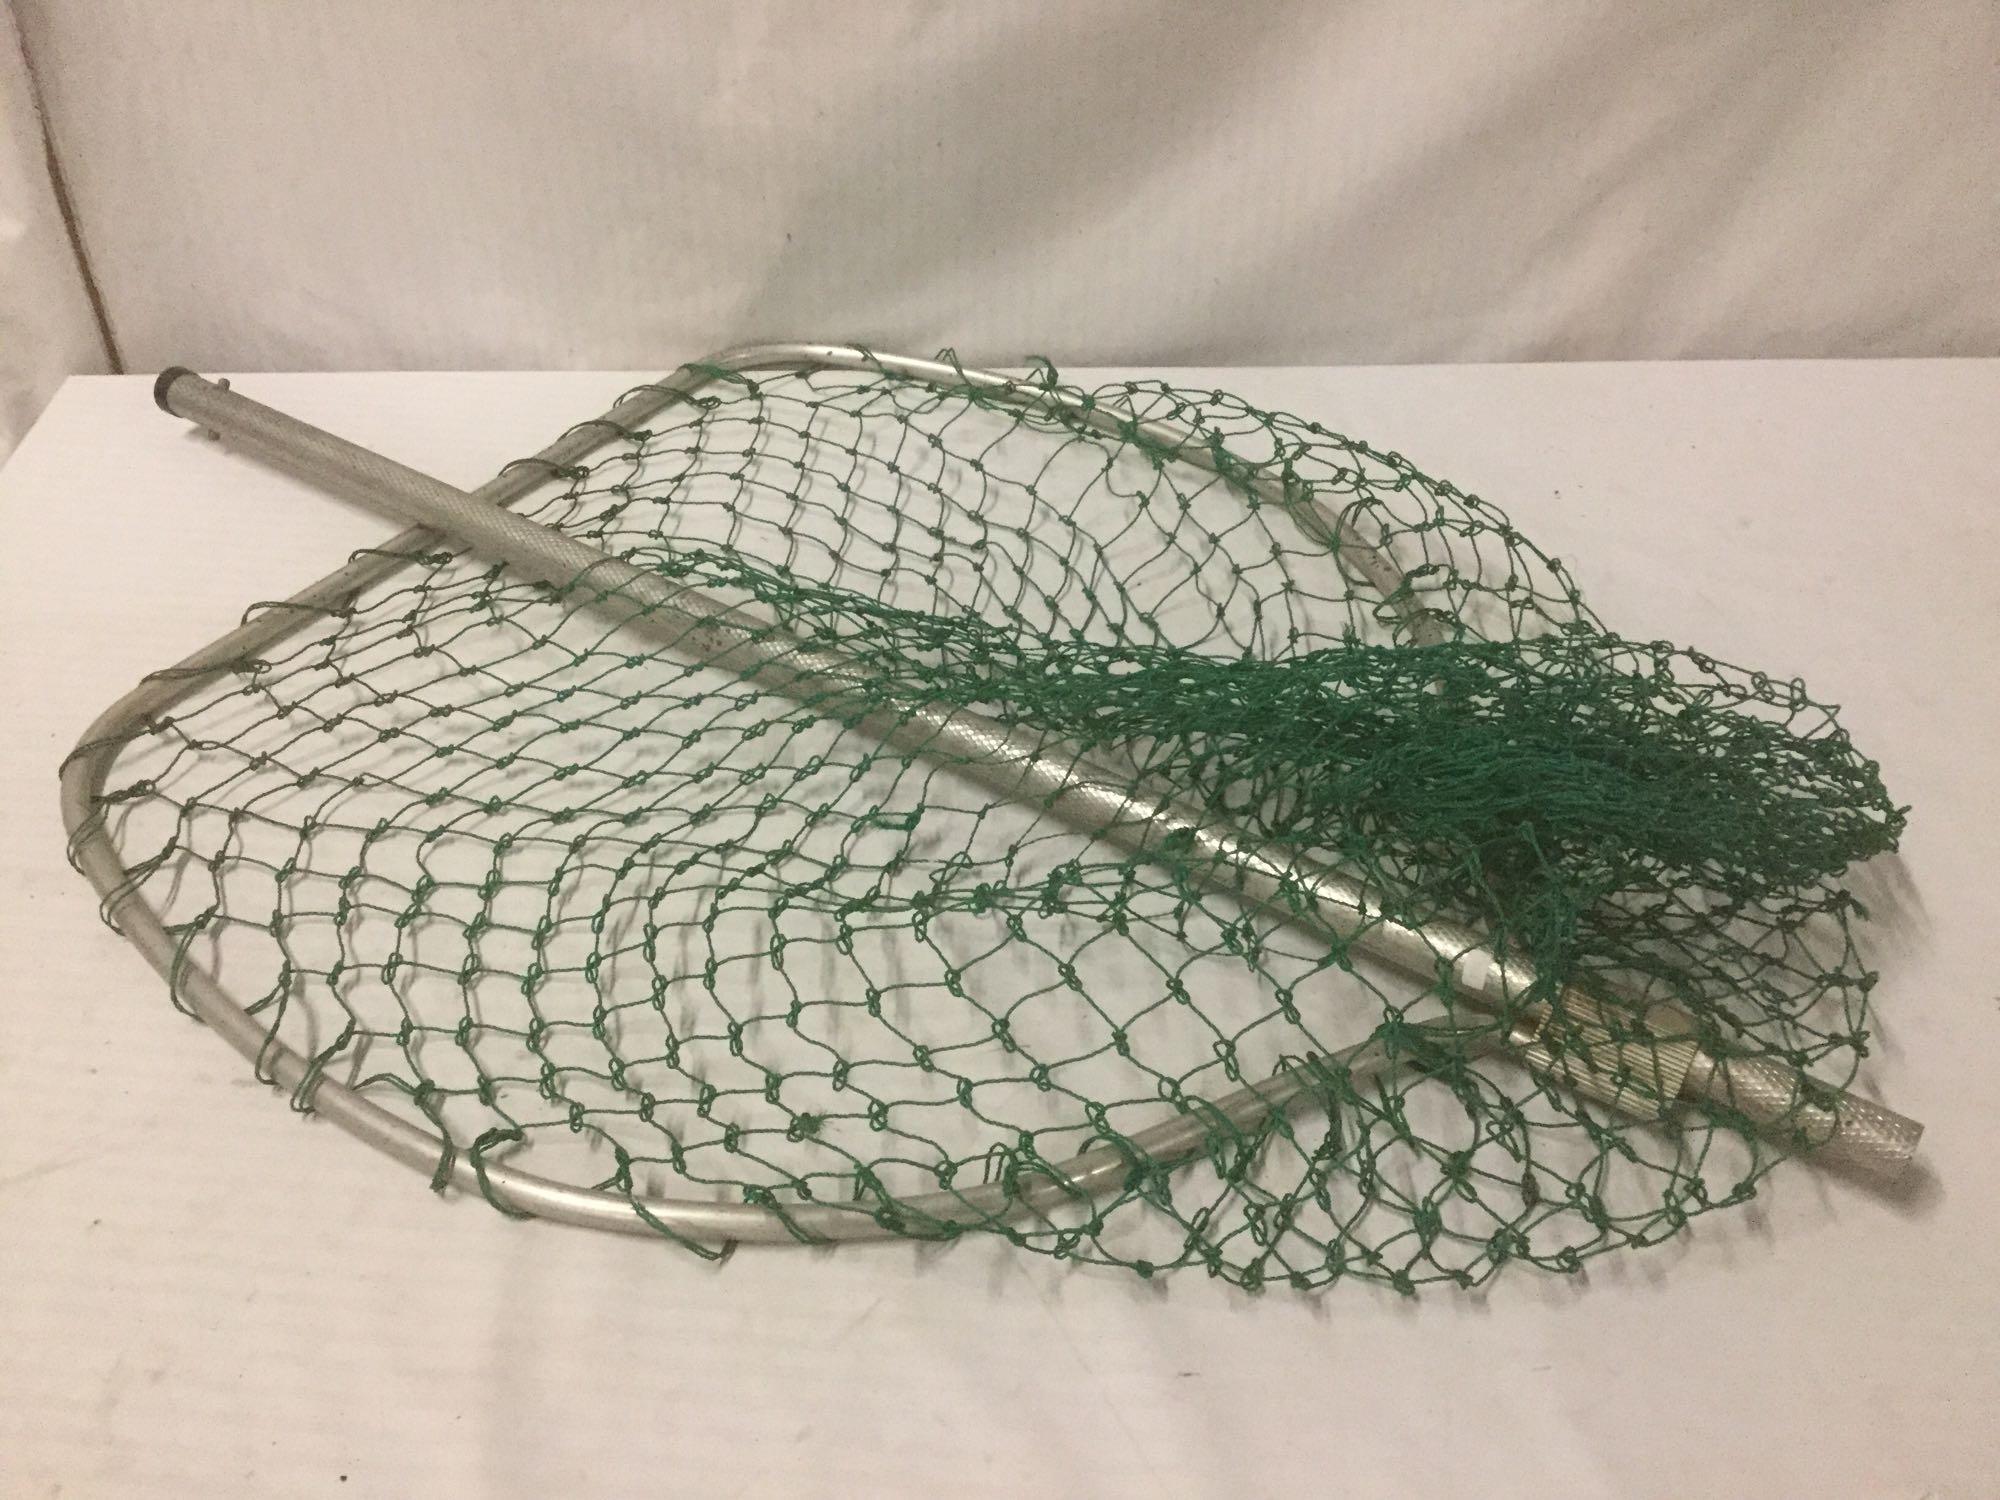 Four large fishing nets, incl. three unmarked